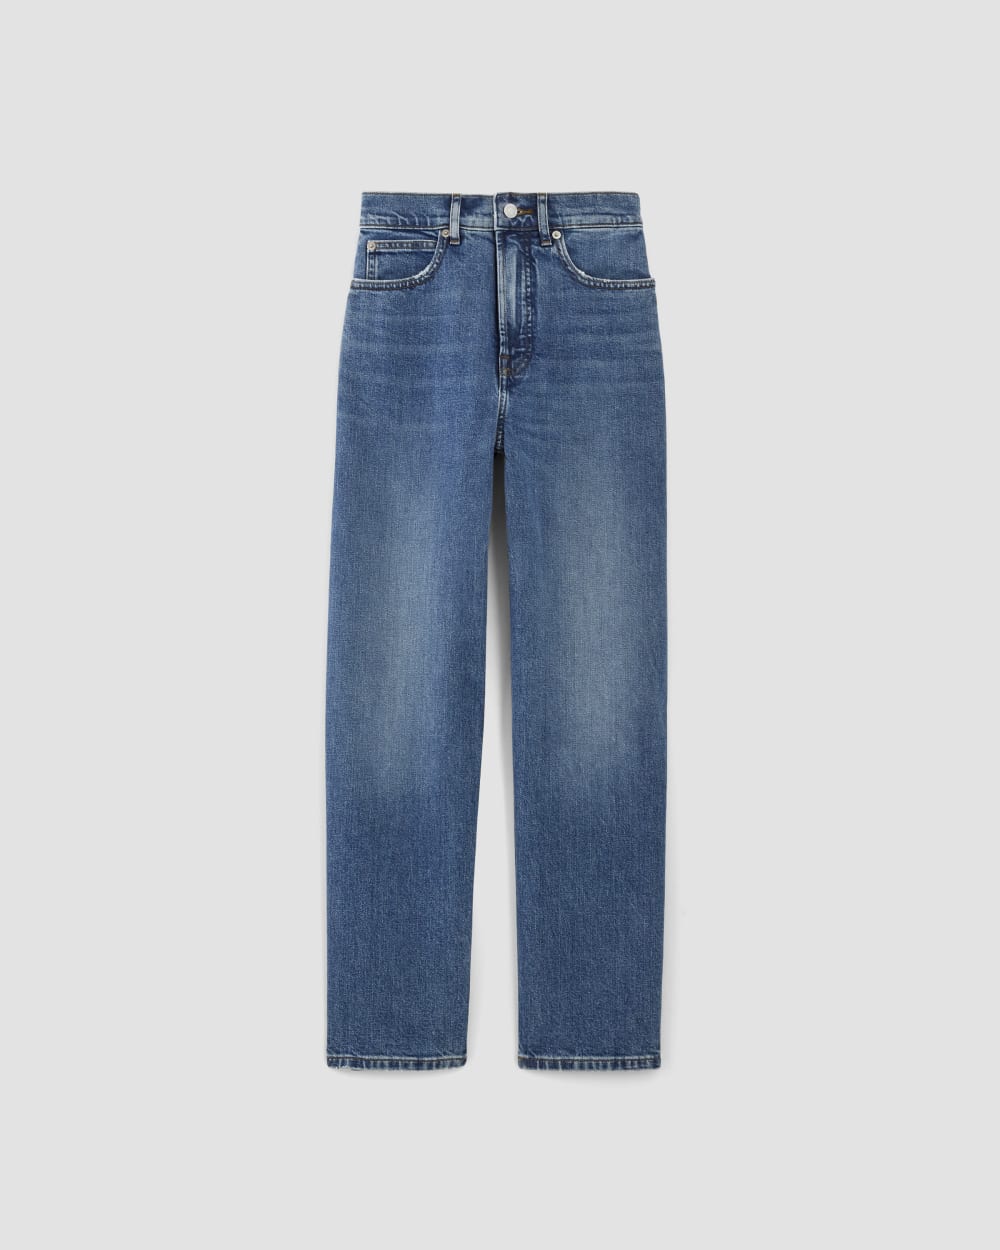 Classic mid bue made-to-measure flared jeans by Studio Heijne